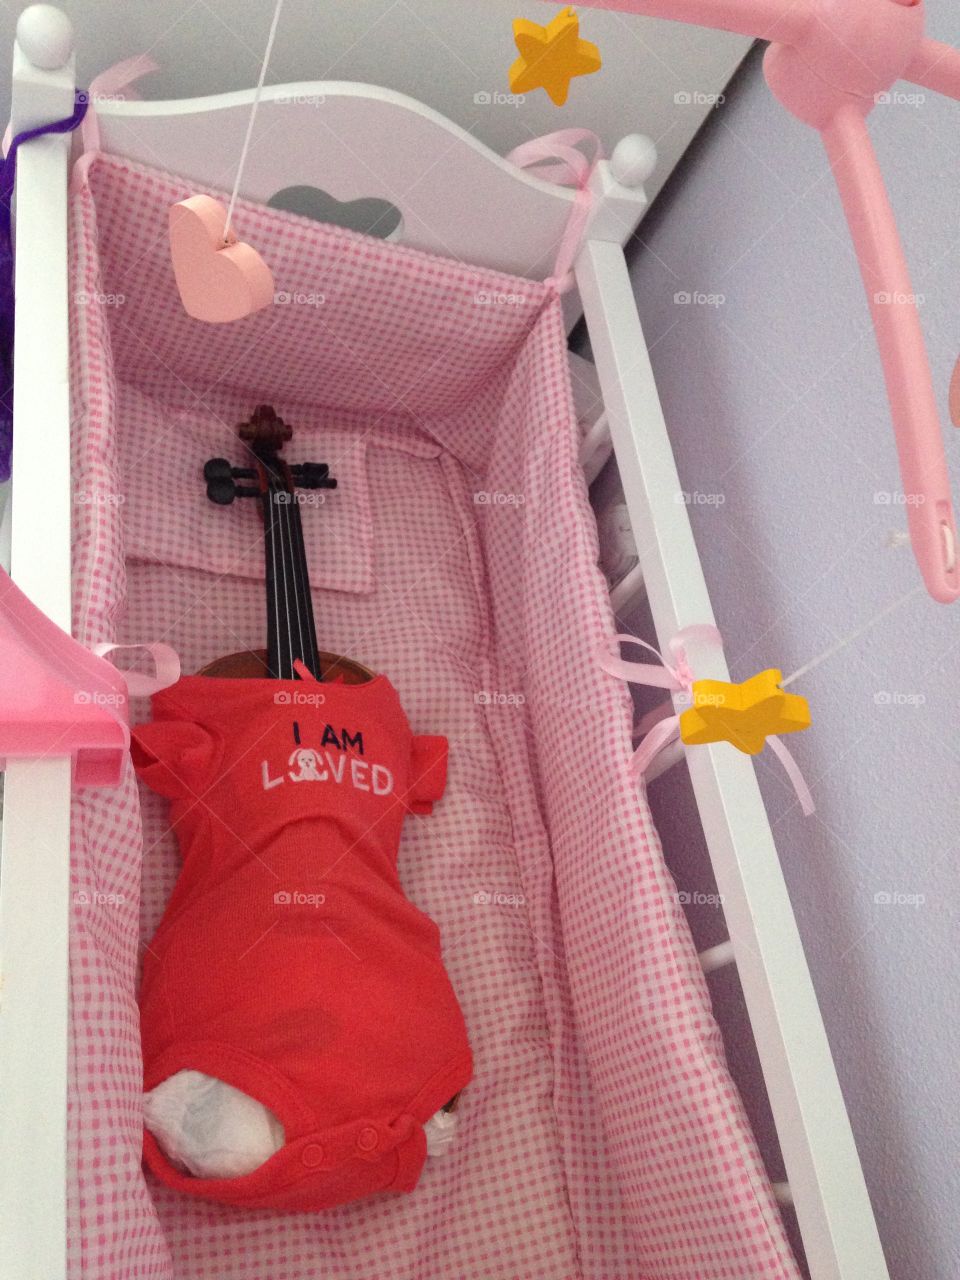 Much Loved Friend. This is how I found my six year old's cherished violin.  In her doll crib sporting a diaper and onesie!